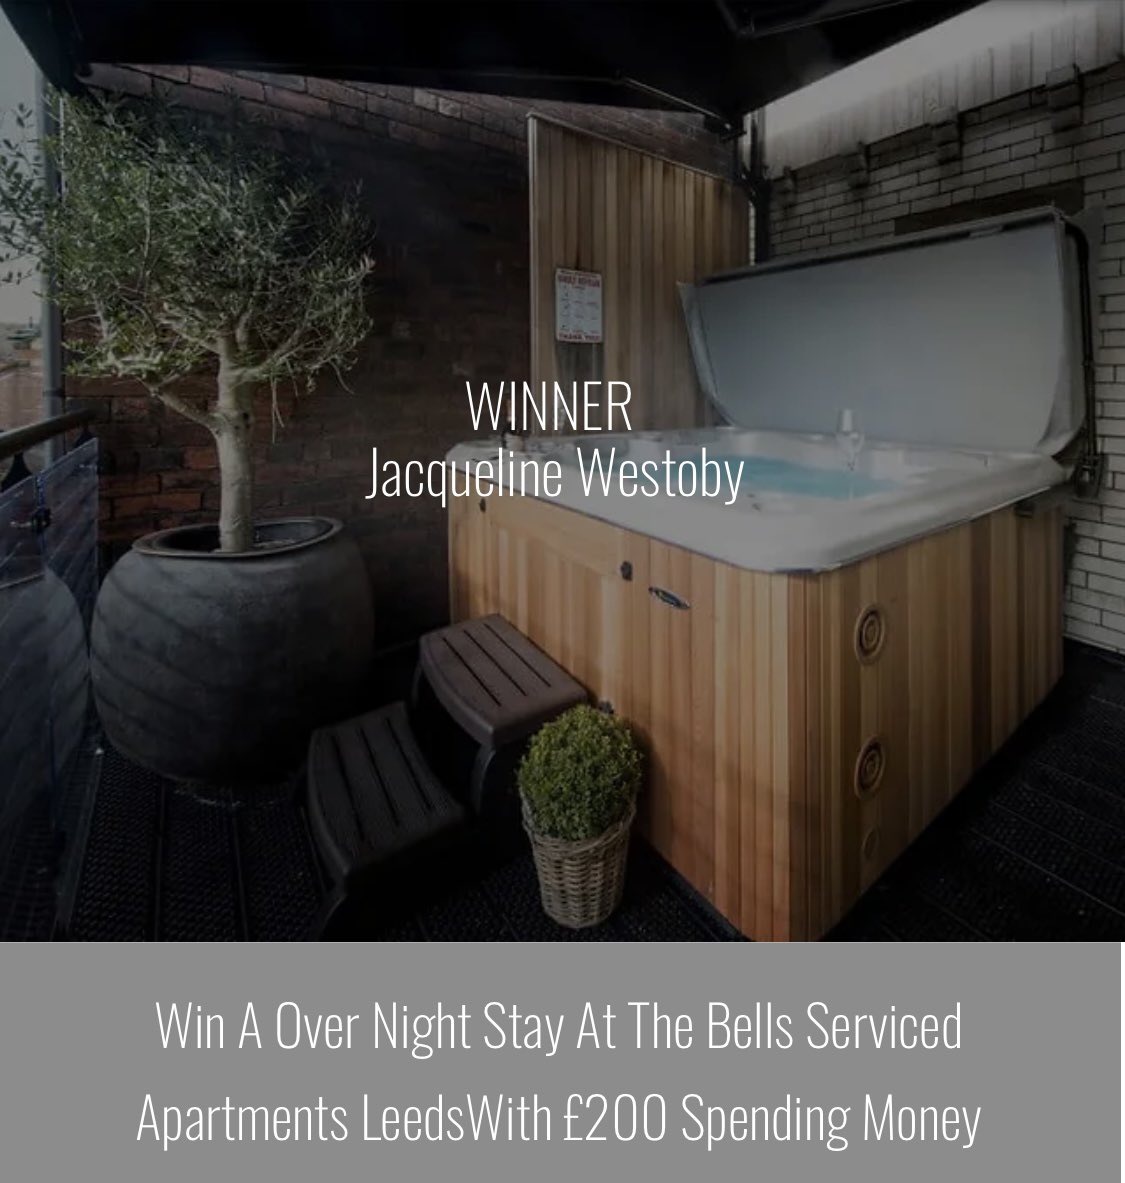 Well done Jacqueline Westoby! Our latest winner. Winning an over night stay at The Bells Leeds. 🎉🎉 secretyorkshire.co.uk/the-bells Details of the next draw will be released shortly